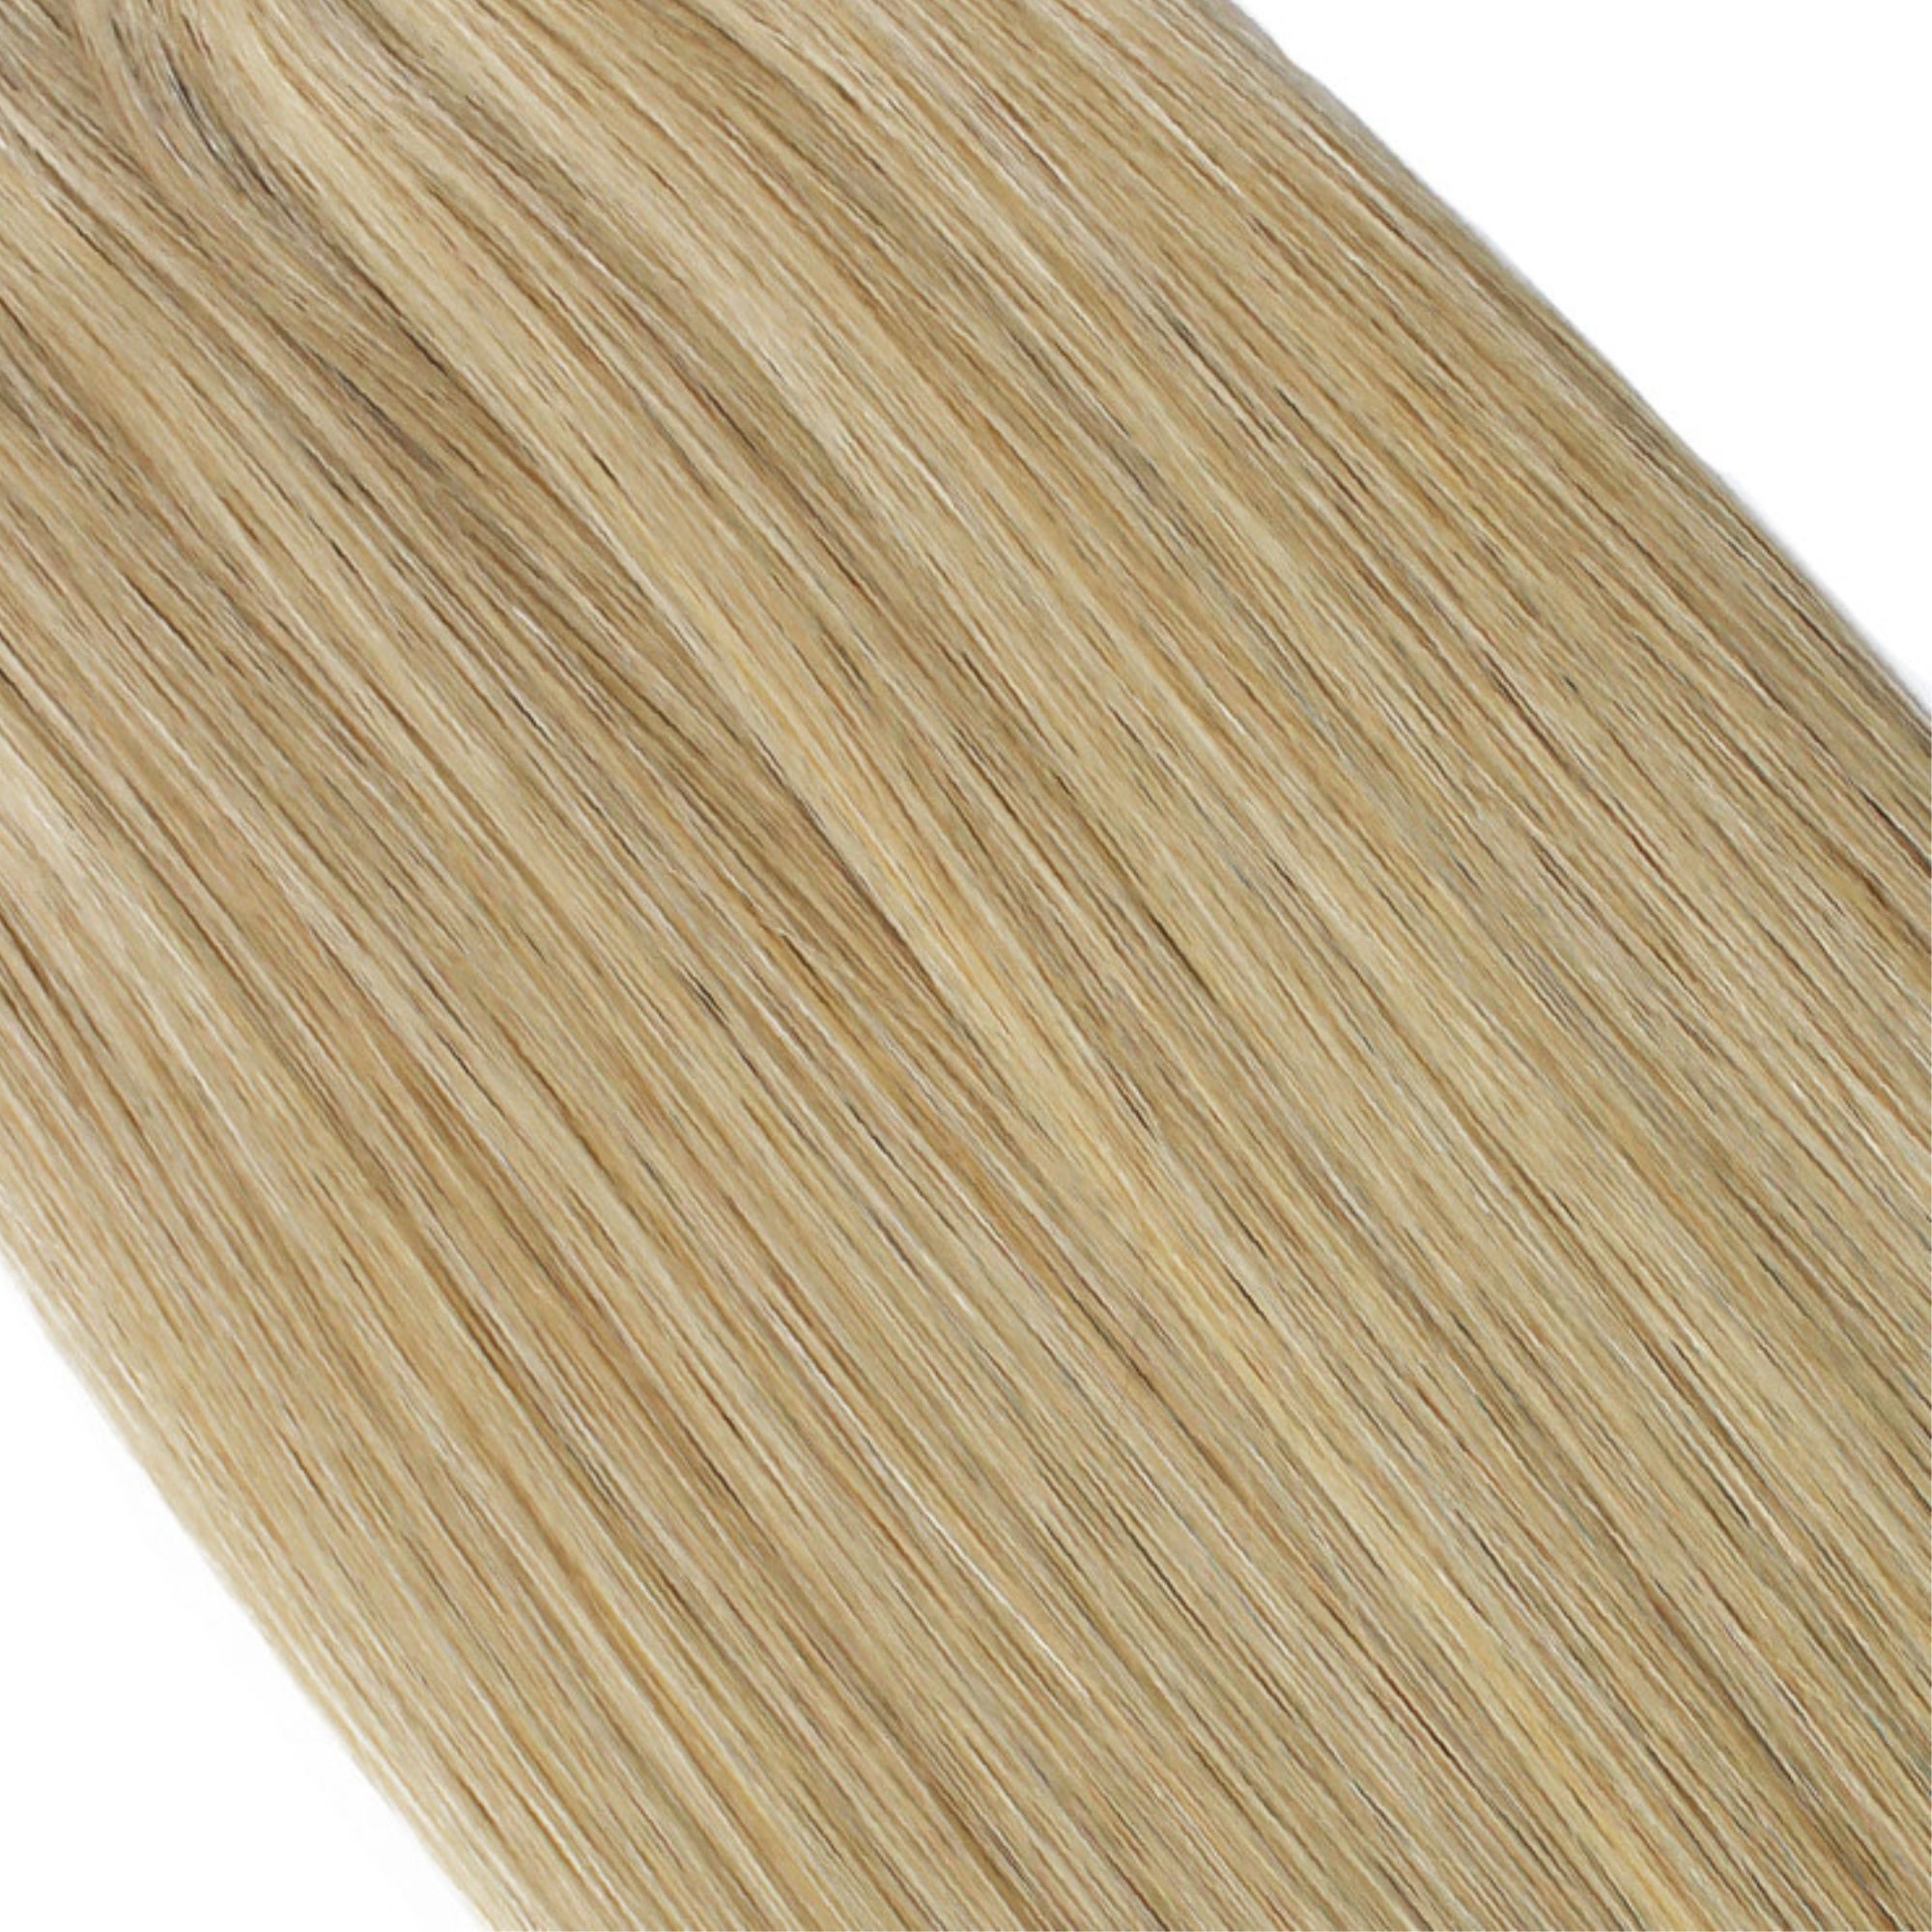 "hair rehab london 14" weft hair extensions shade swatch titled dirty blonde"